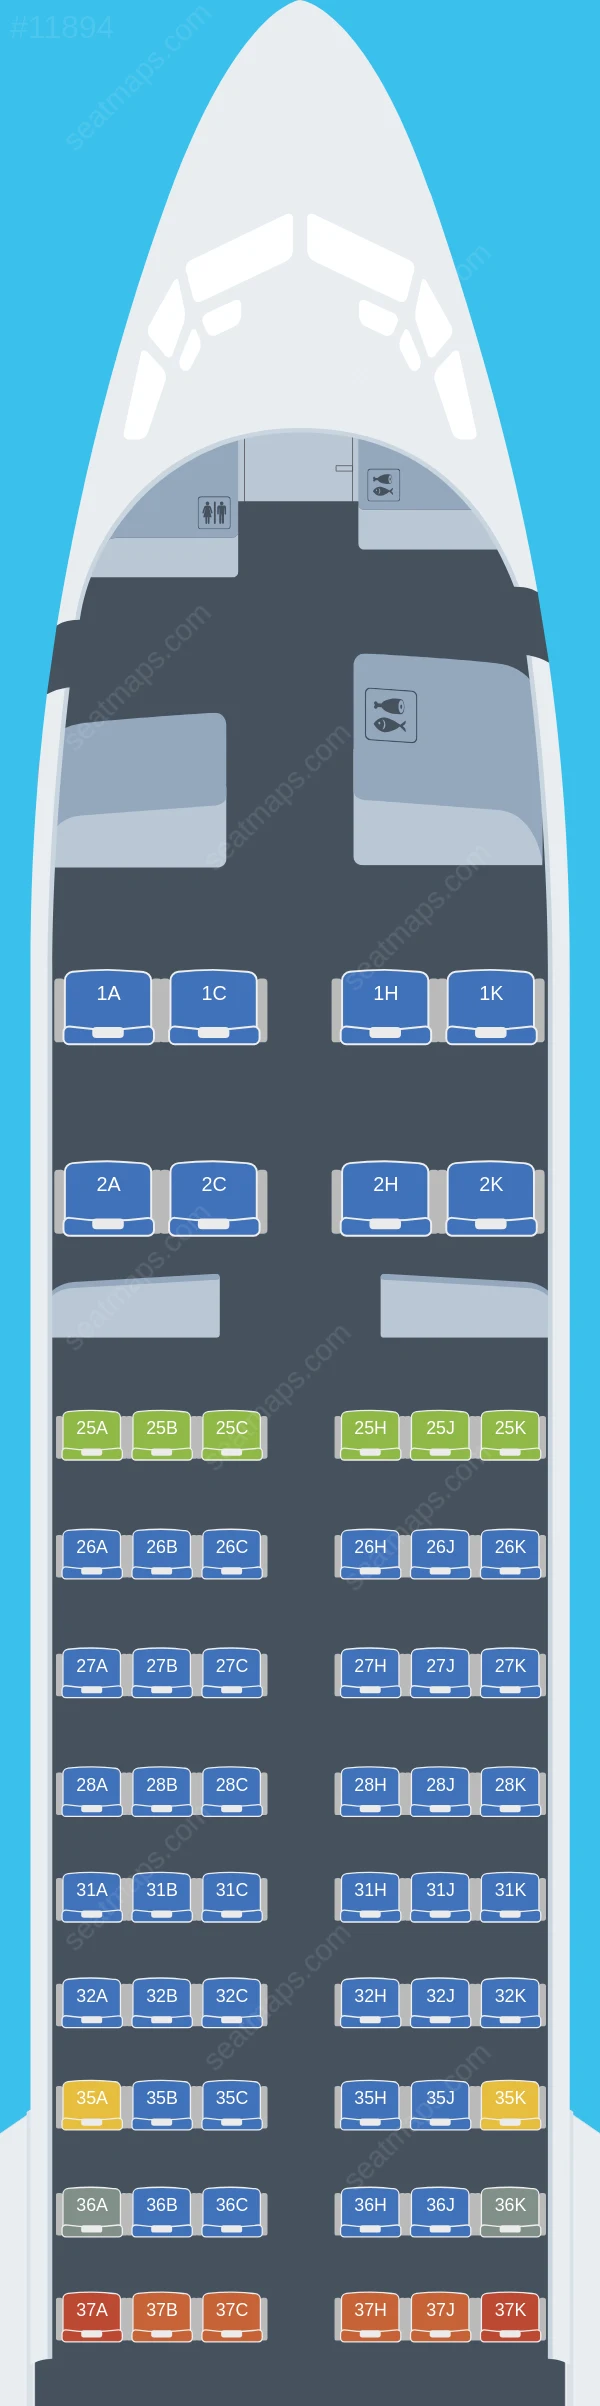 China Southern Boeing 737 MAX 8 V.2 seatmap preview